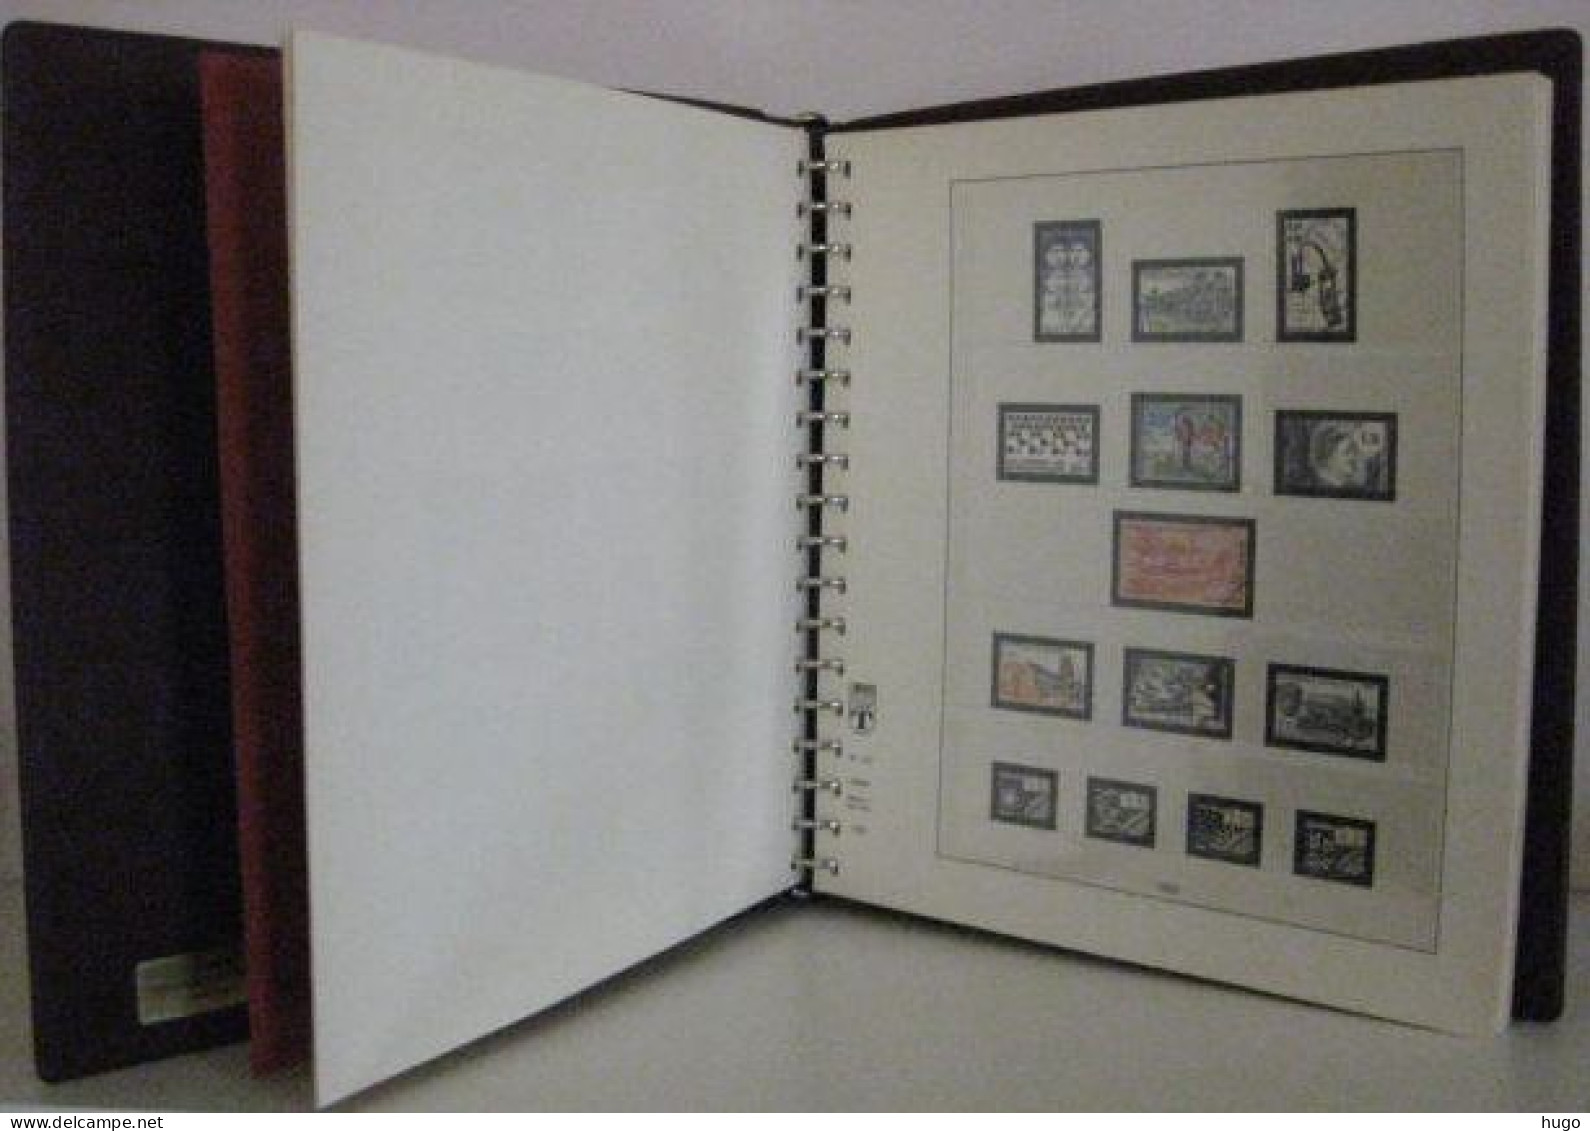 LINDNER FRANCE - ILLUSTRATED ALBUM PAGES YEAR 1984-1989, INCL. RING BINDER - Binders With Pages